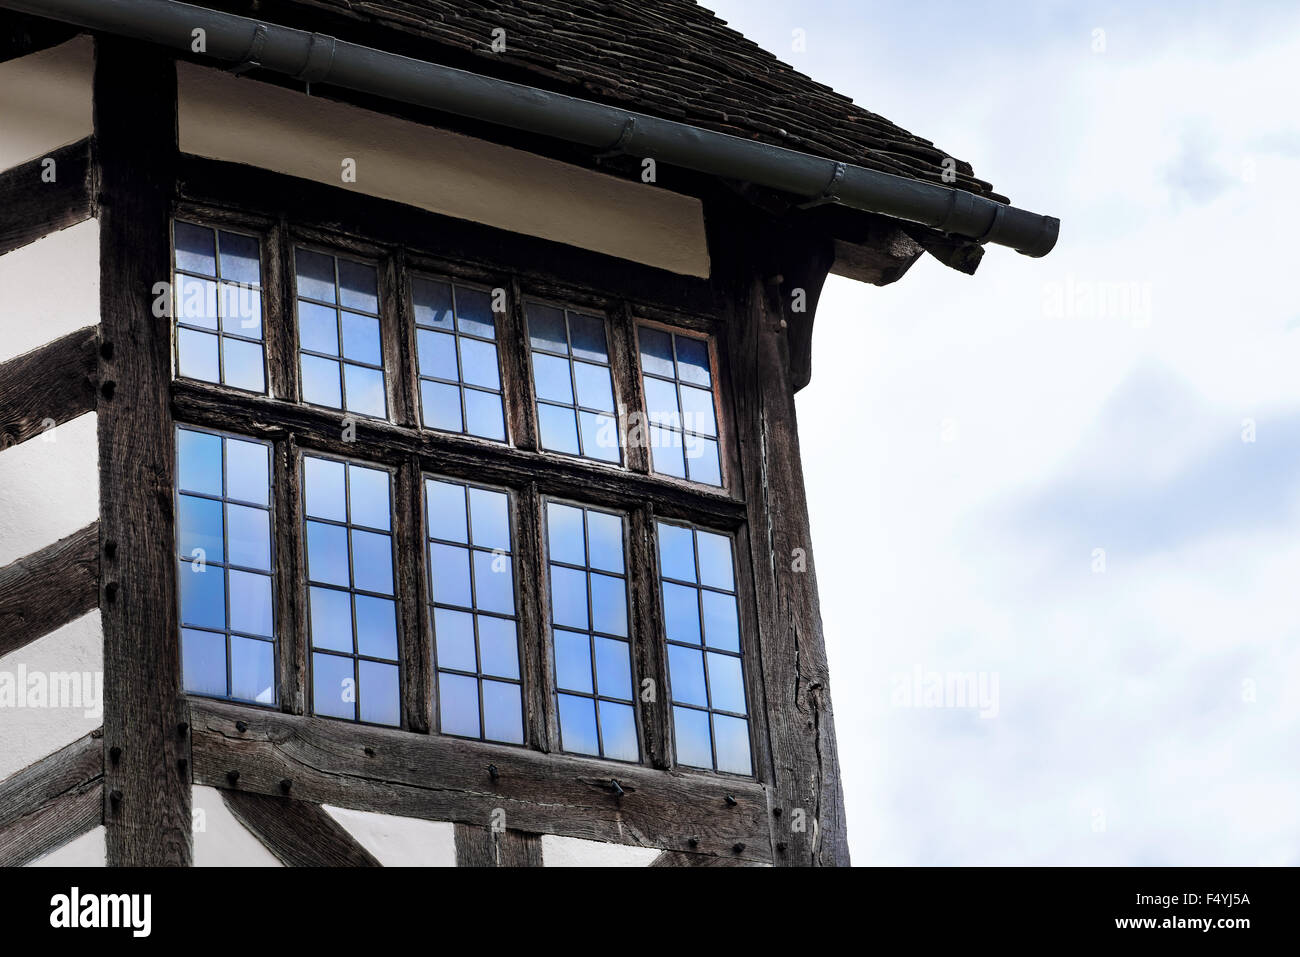 Tudor house exterior detail built in 1590 detail of window and roof Blakesley hall closeup Stock Photo